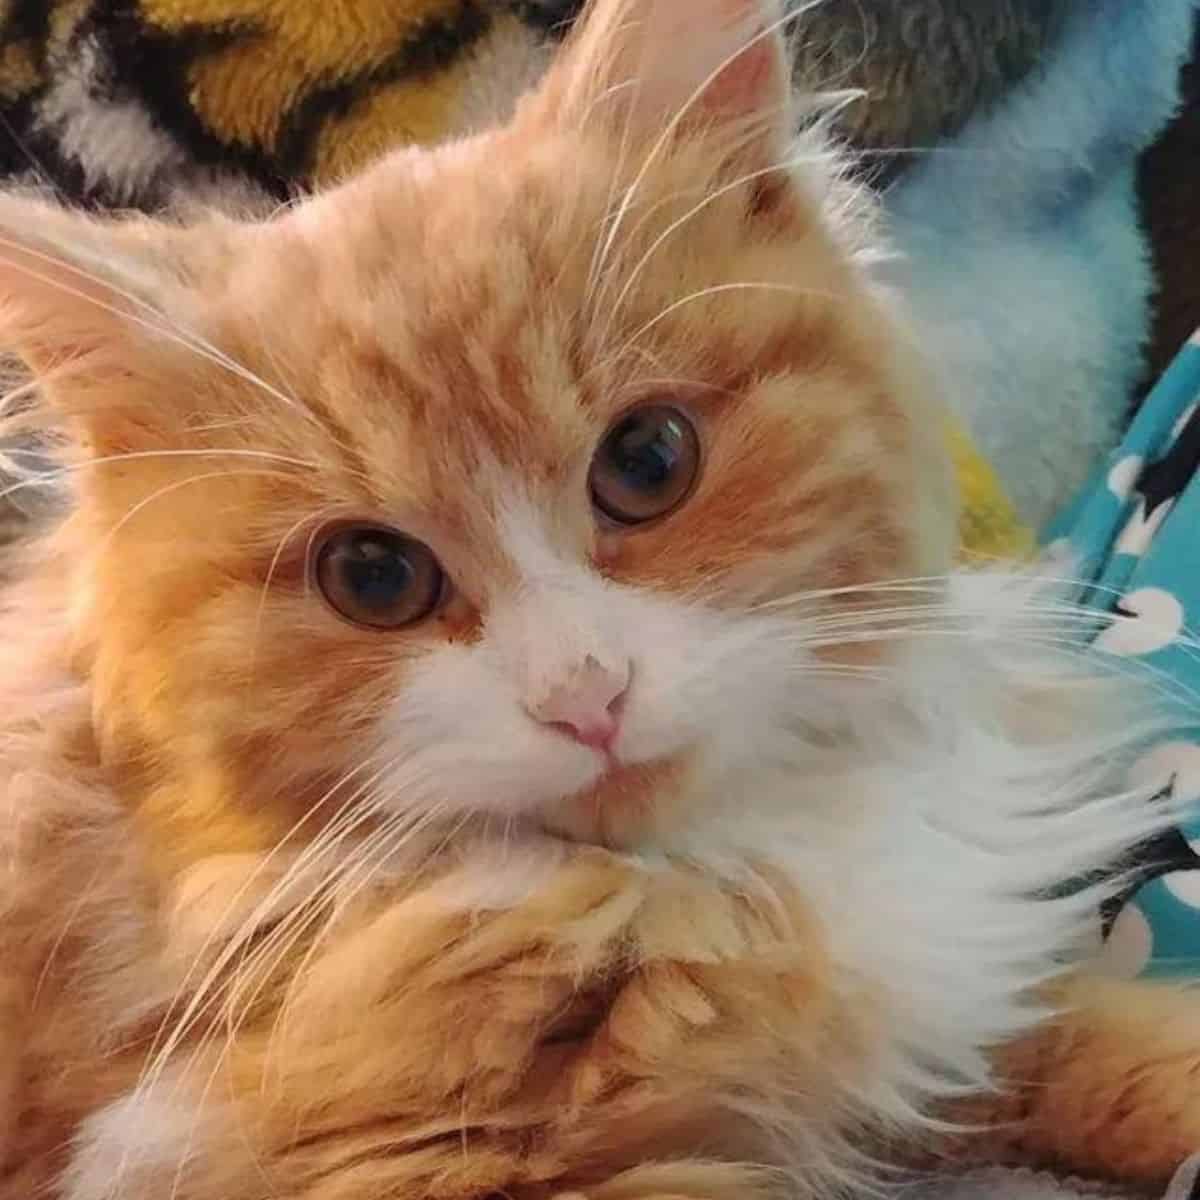 cute cat with orange and white fur